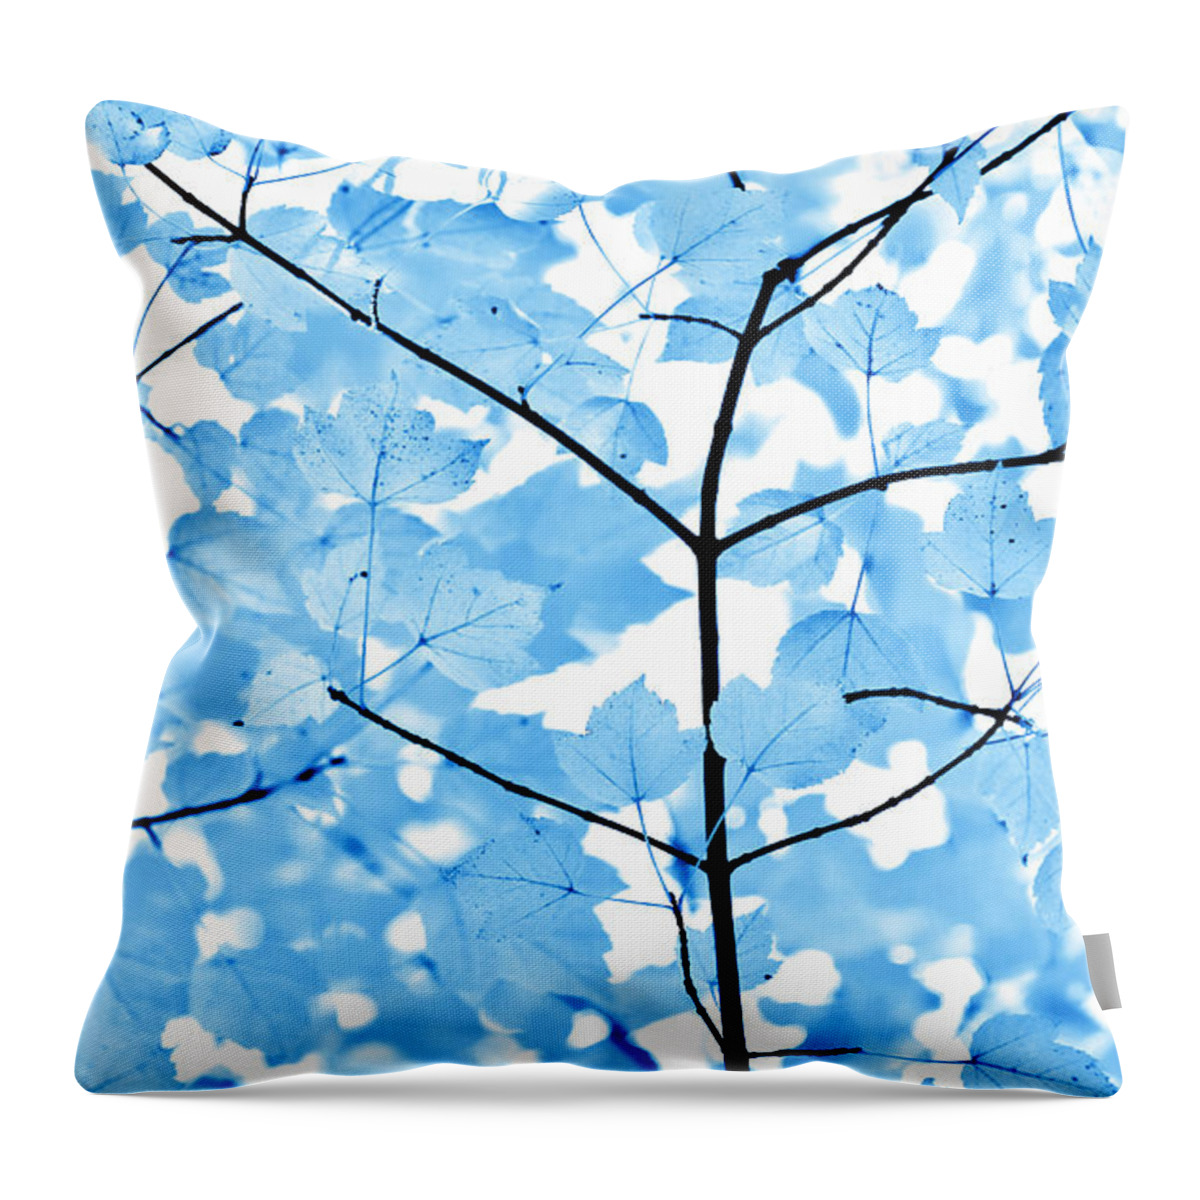 Leaf Throw Pillow featuring the photograph Blue Leaves Melody by Jennie Marie Schell